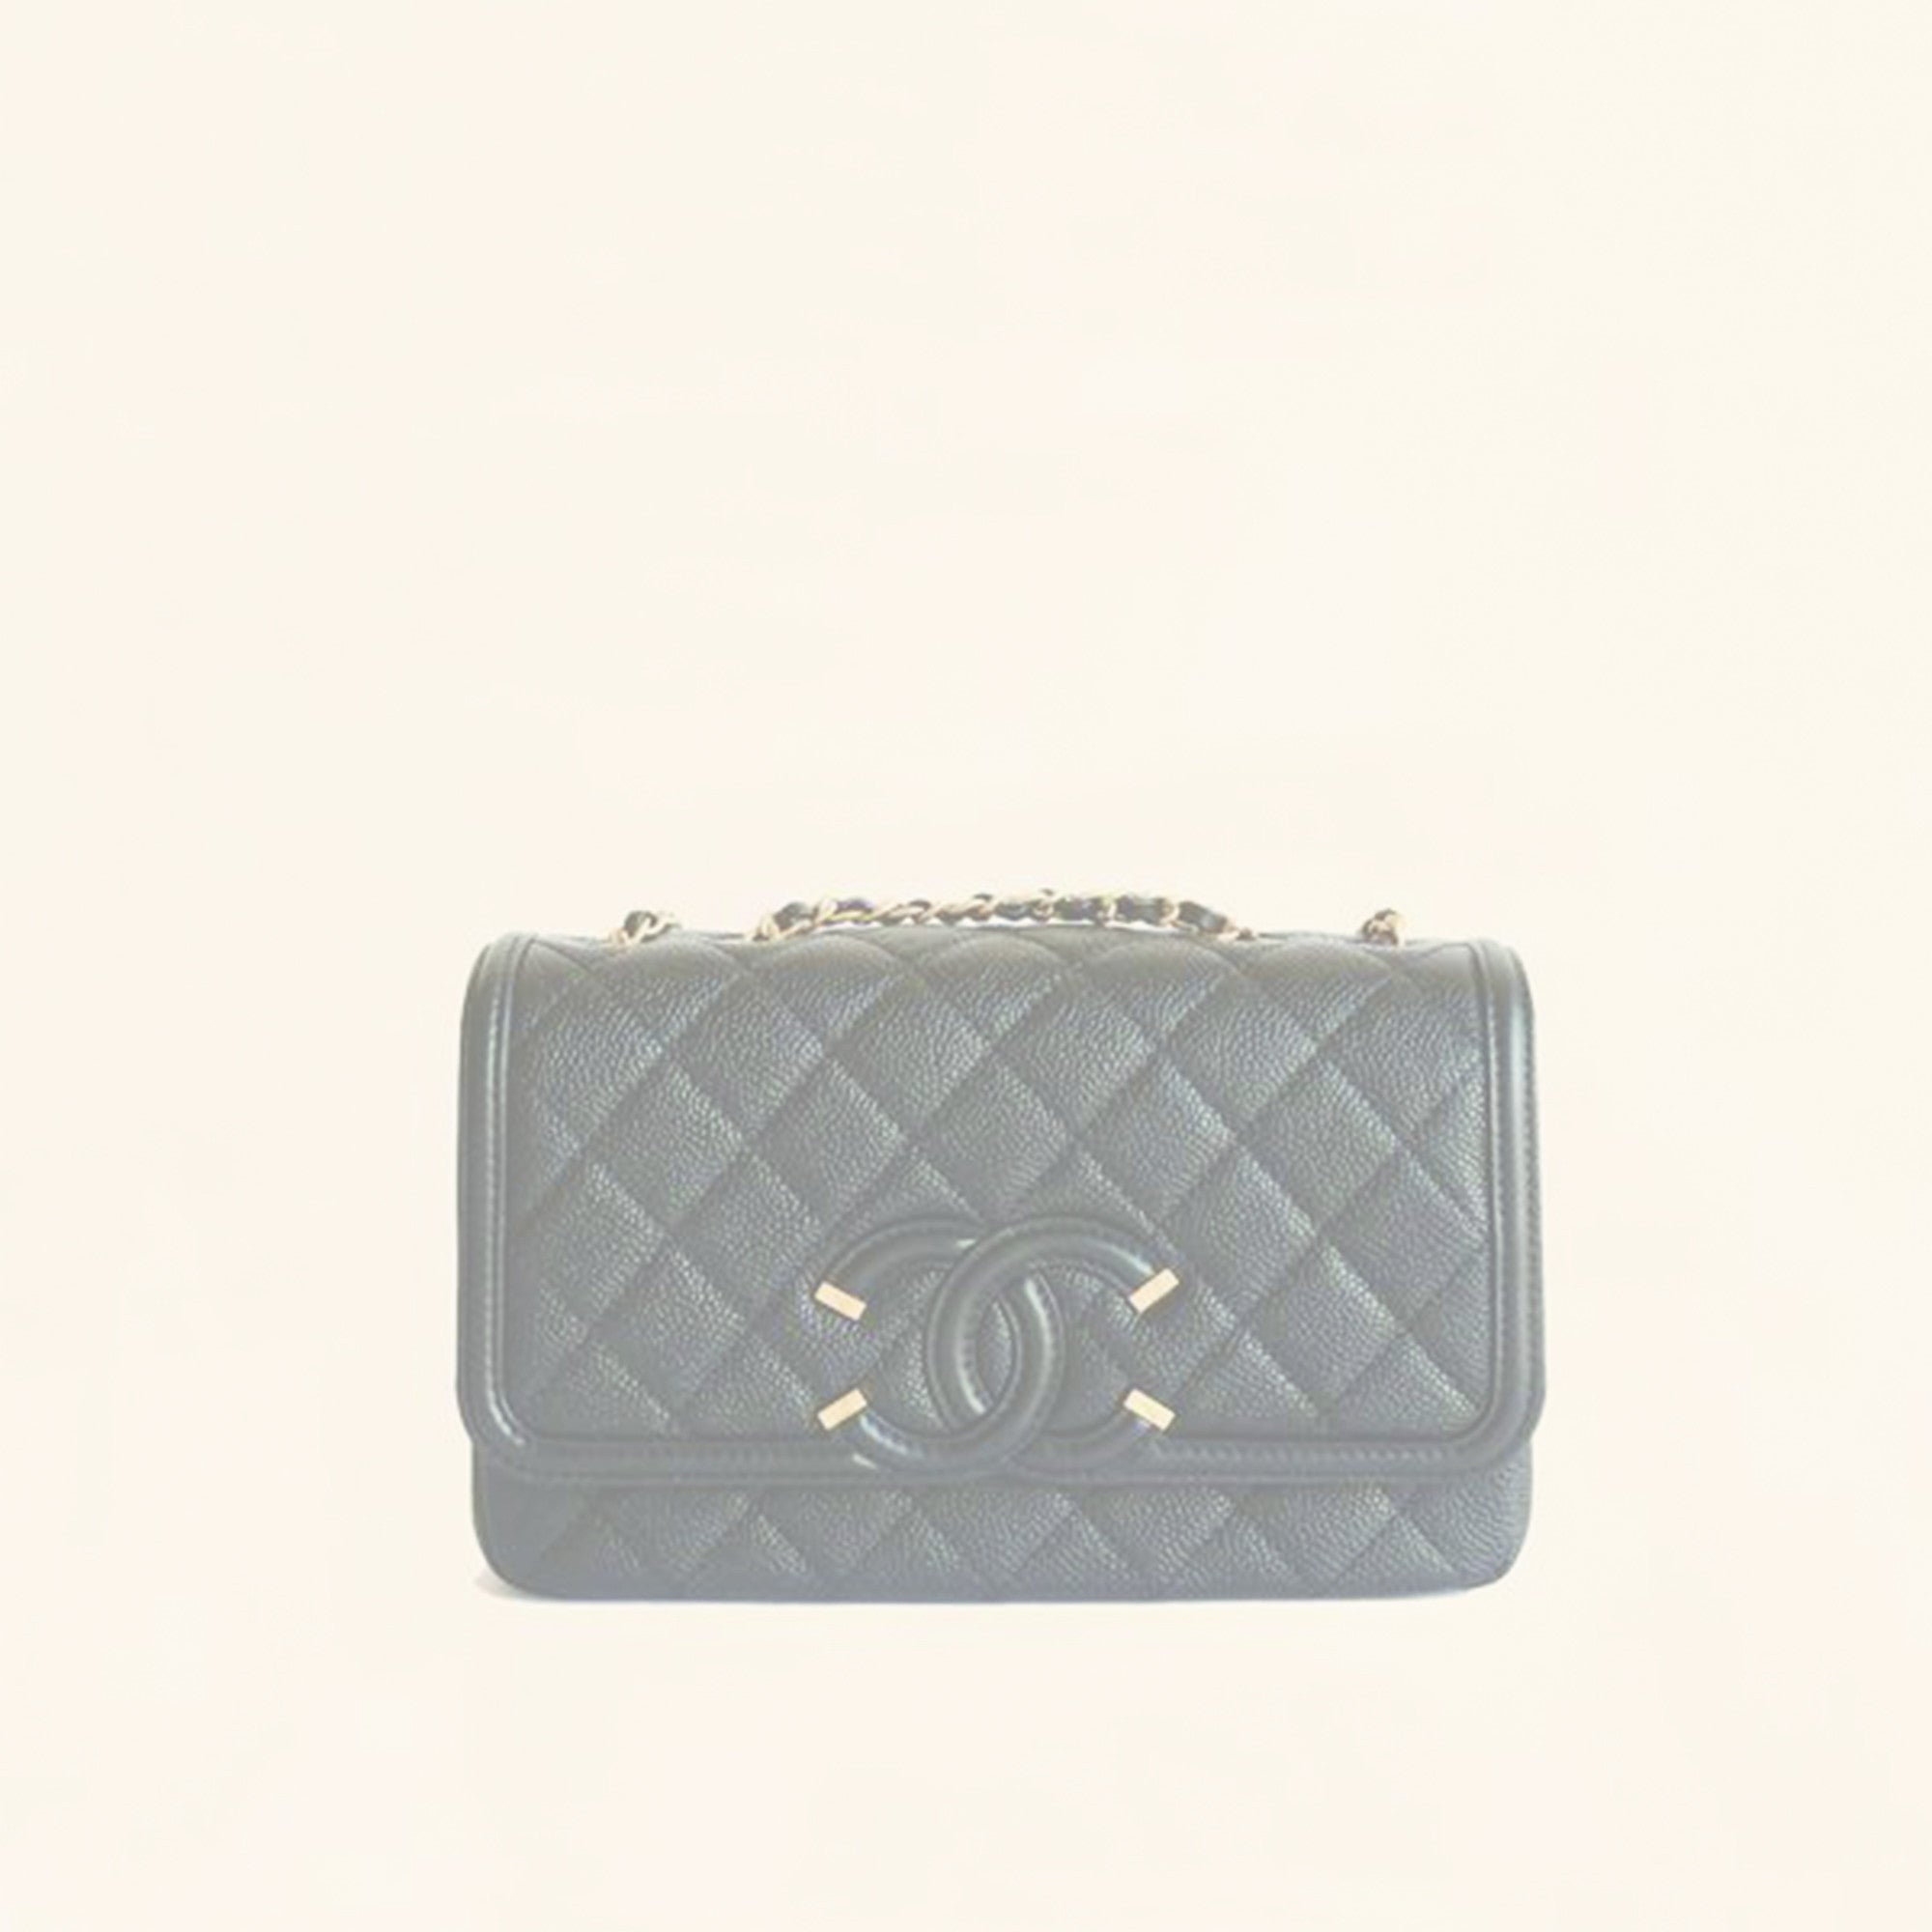 Chanel | Caviar SS16 Quilted Filigree Flap Bag | Small